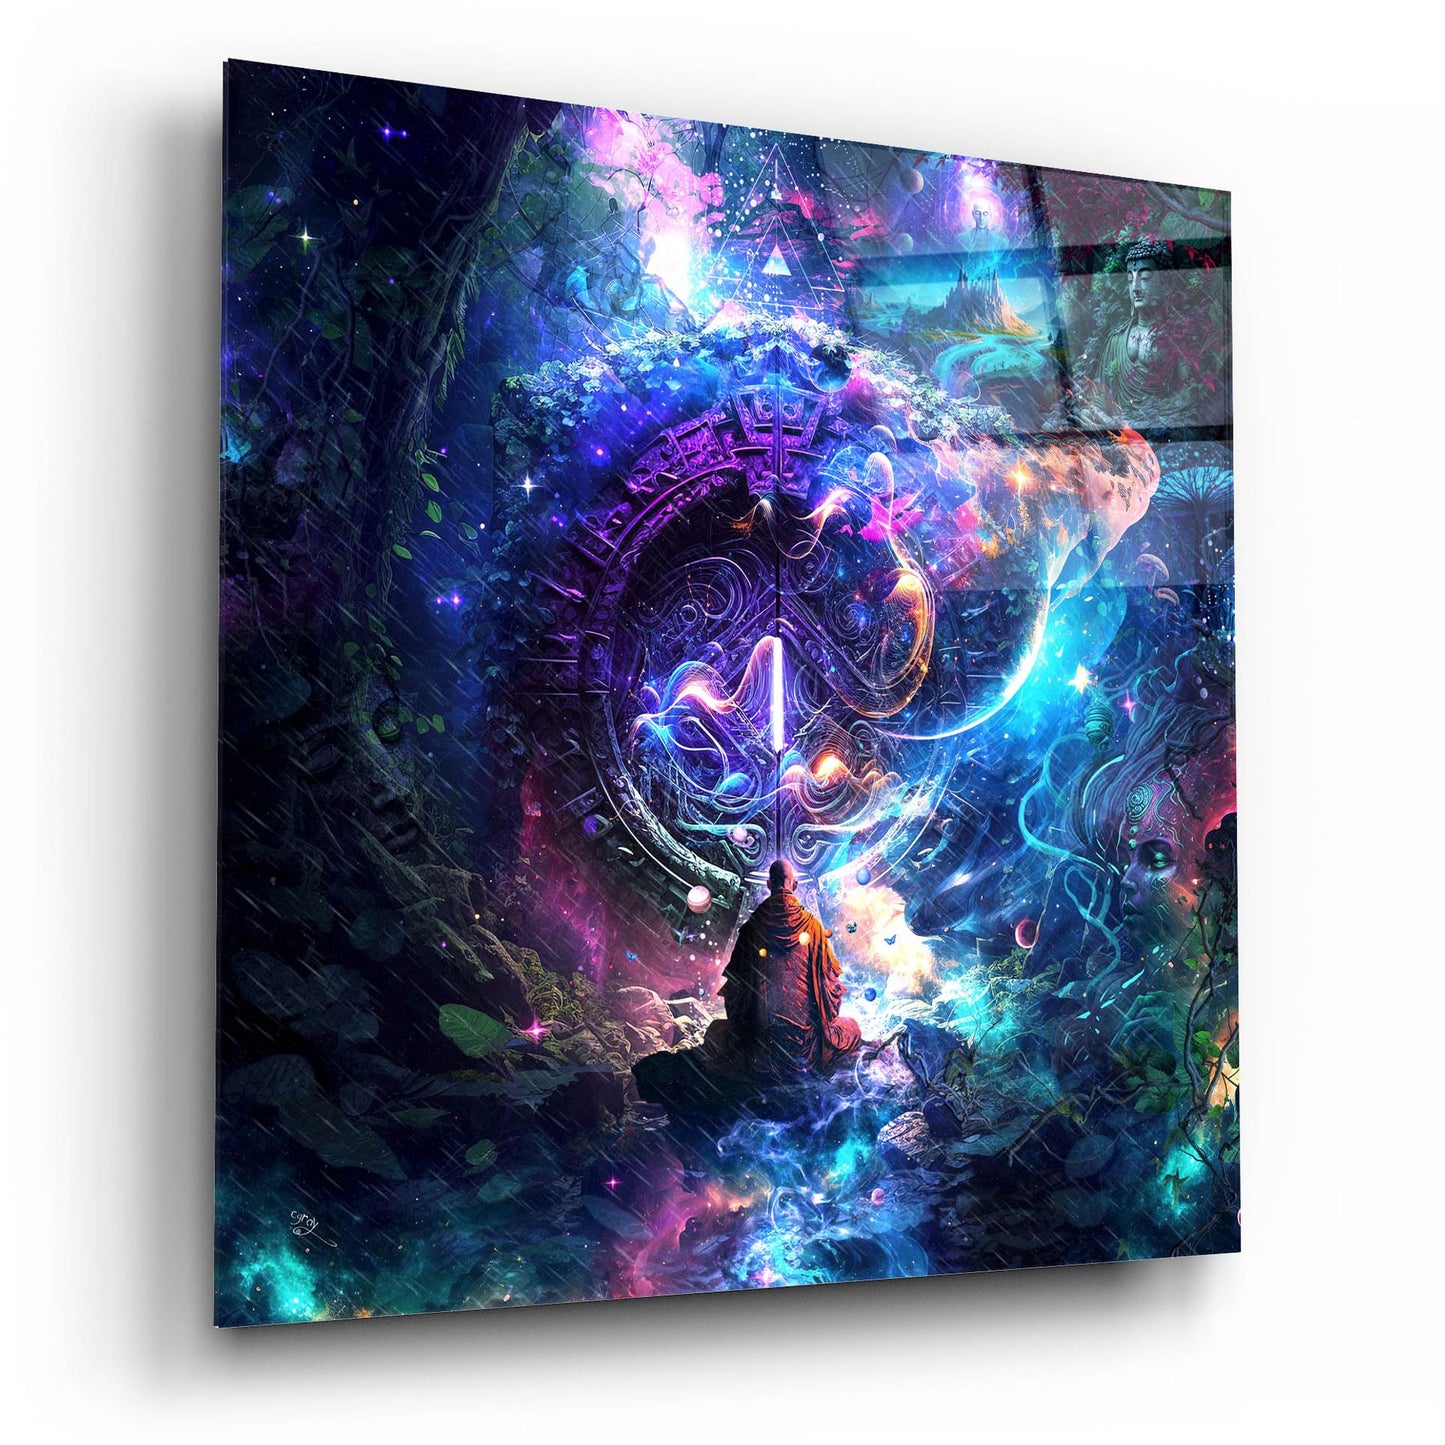 Epic Art 'Somewhere To Dream' by Cameron Gray, Acrylic Glass Wall Art,12x12